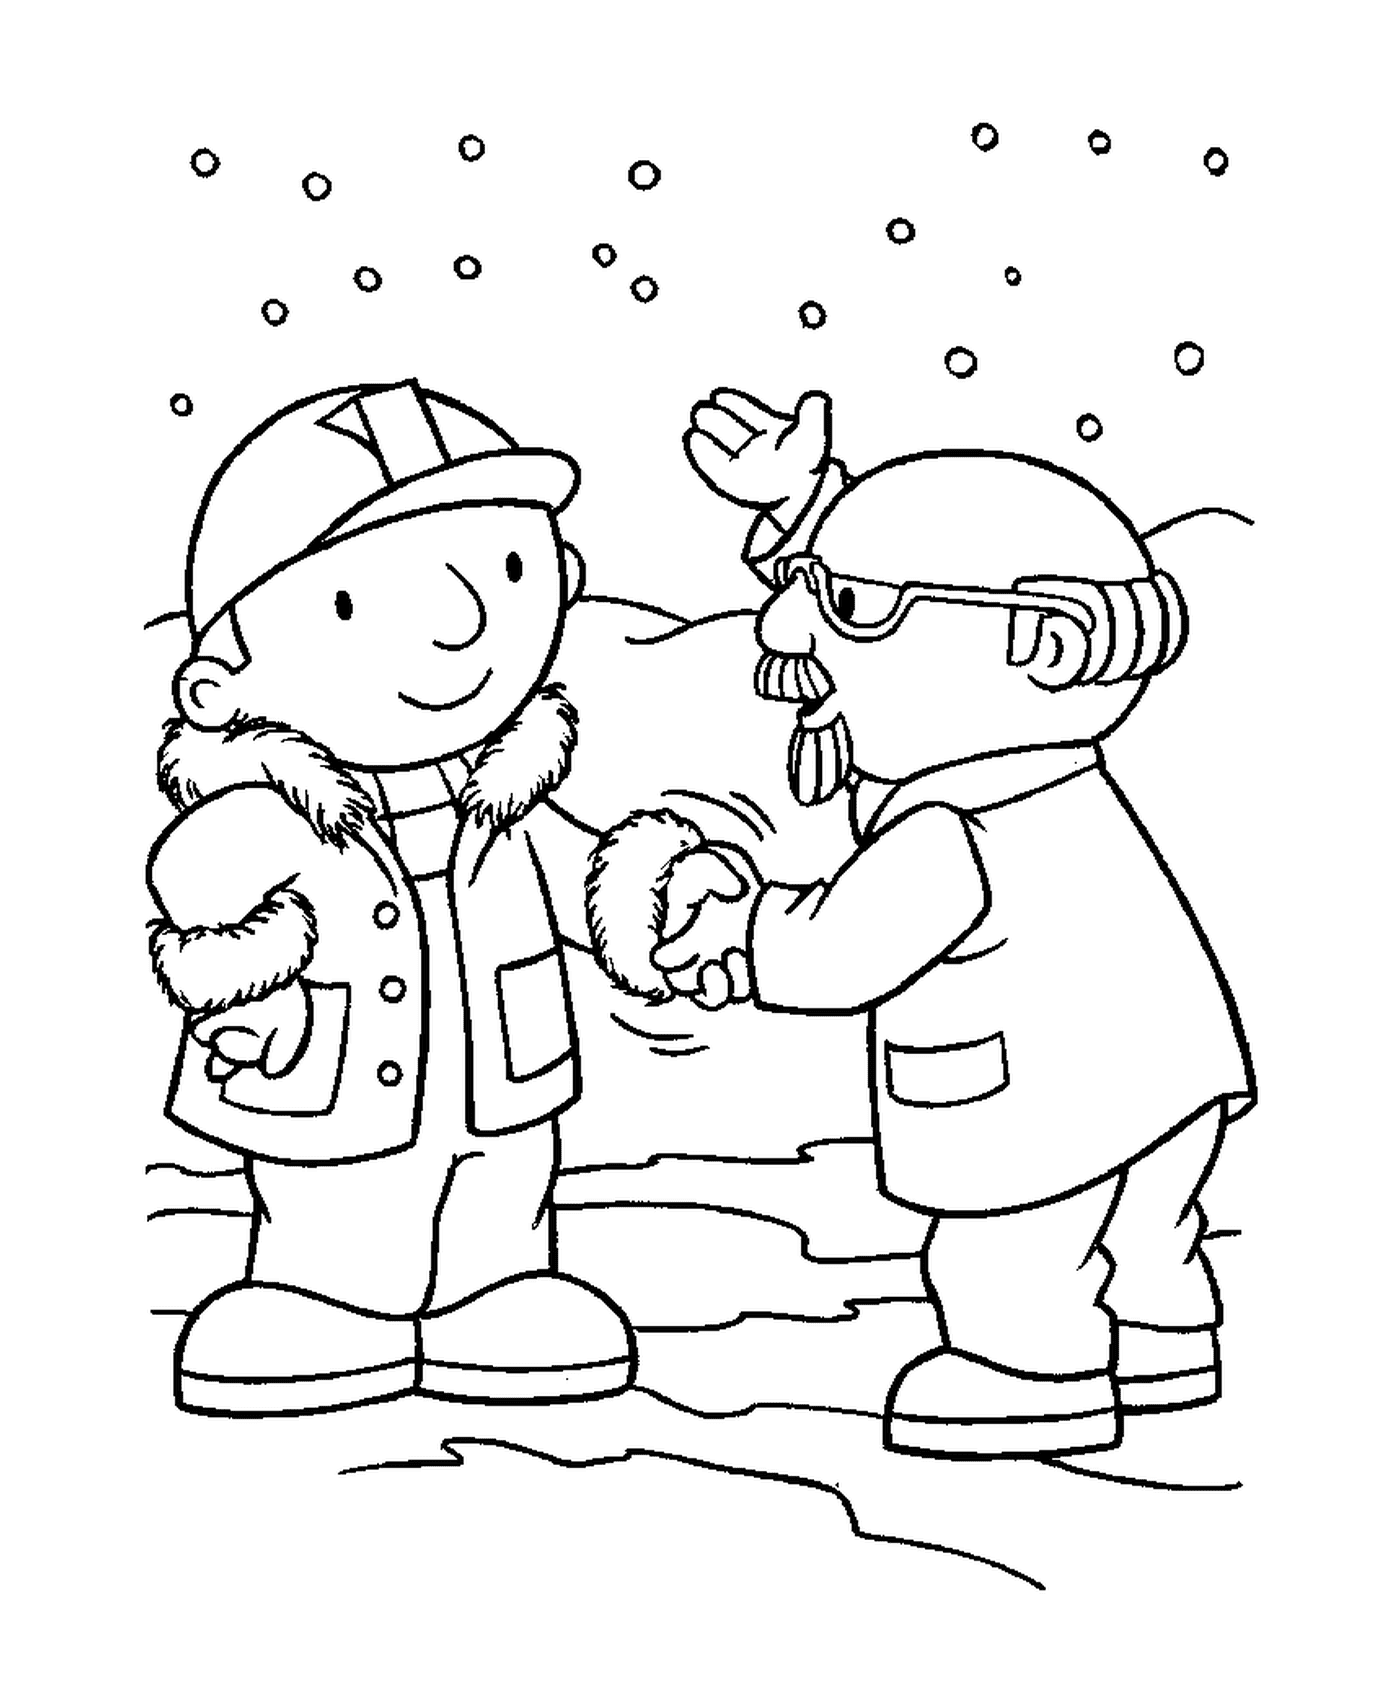  Two people shake hands in the snow 